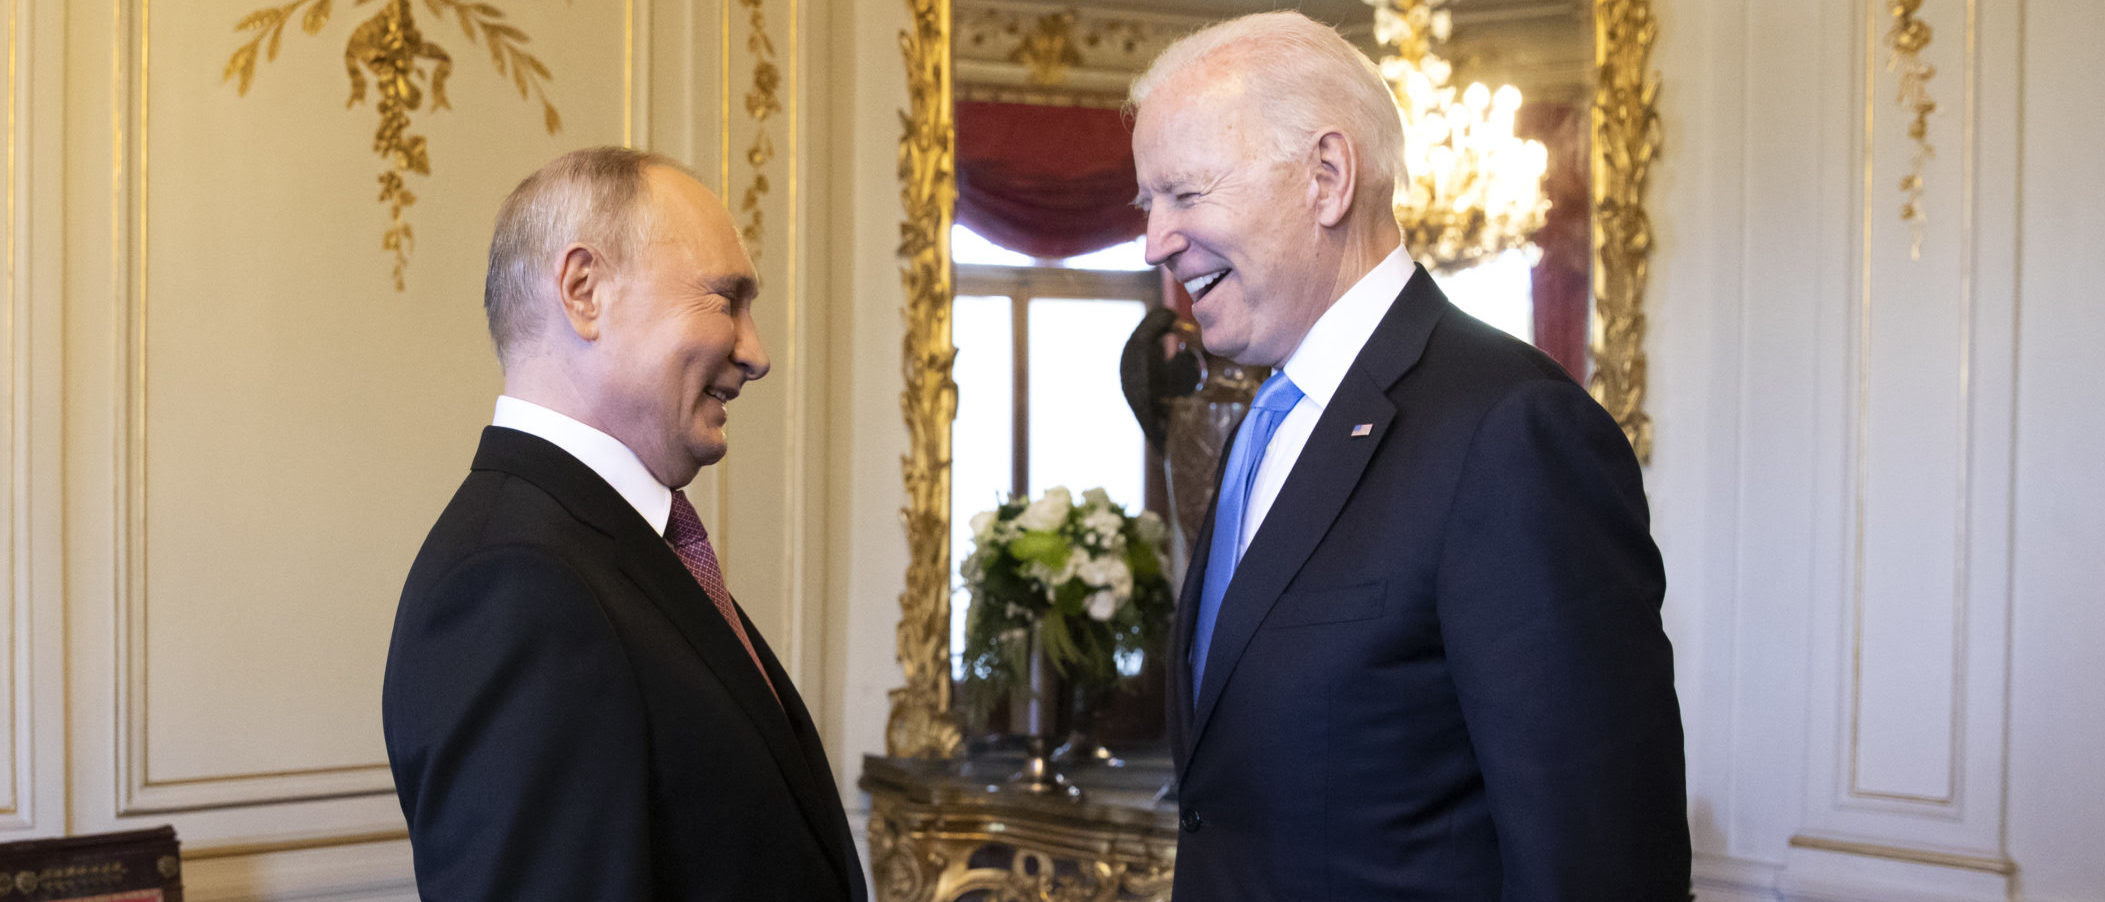 EXCLUSIVE: ‘Speak Loudly And Carry A Small Stick’: Republicans Blast Biden’s Response To Putin’s Escalation In Ukraine